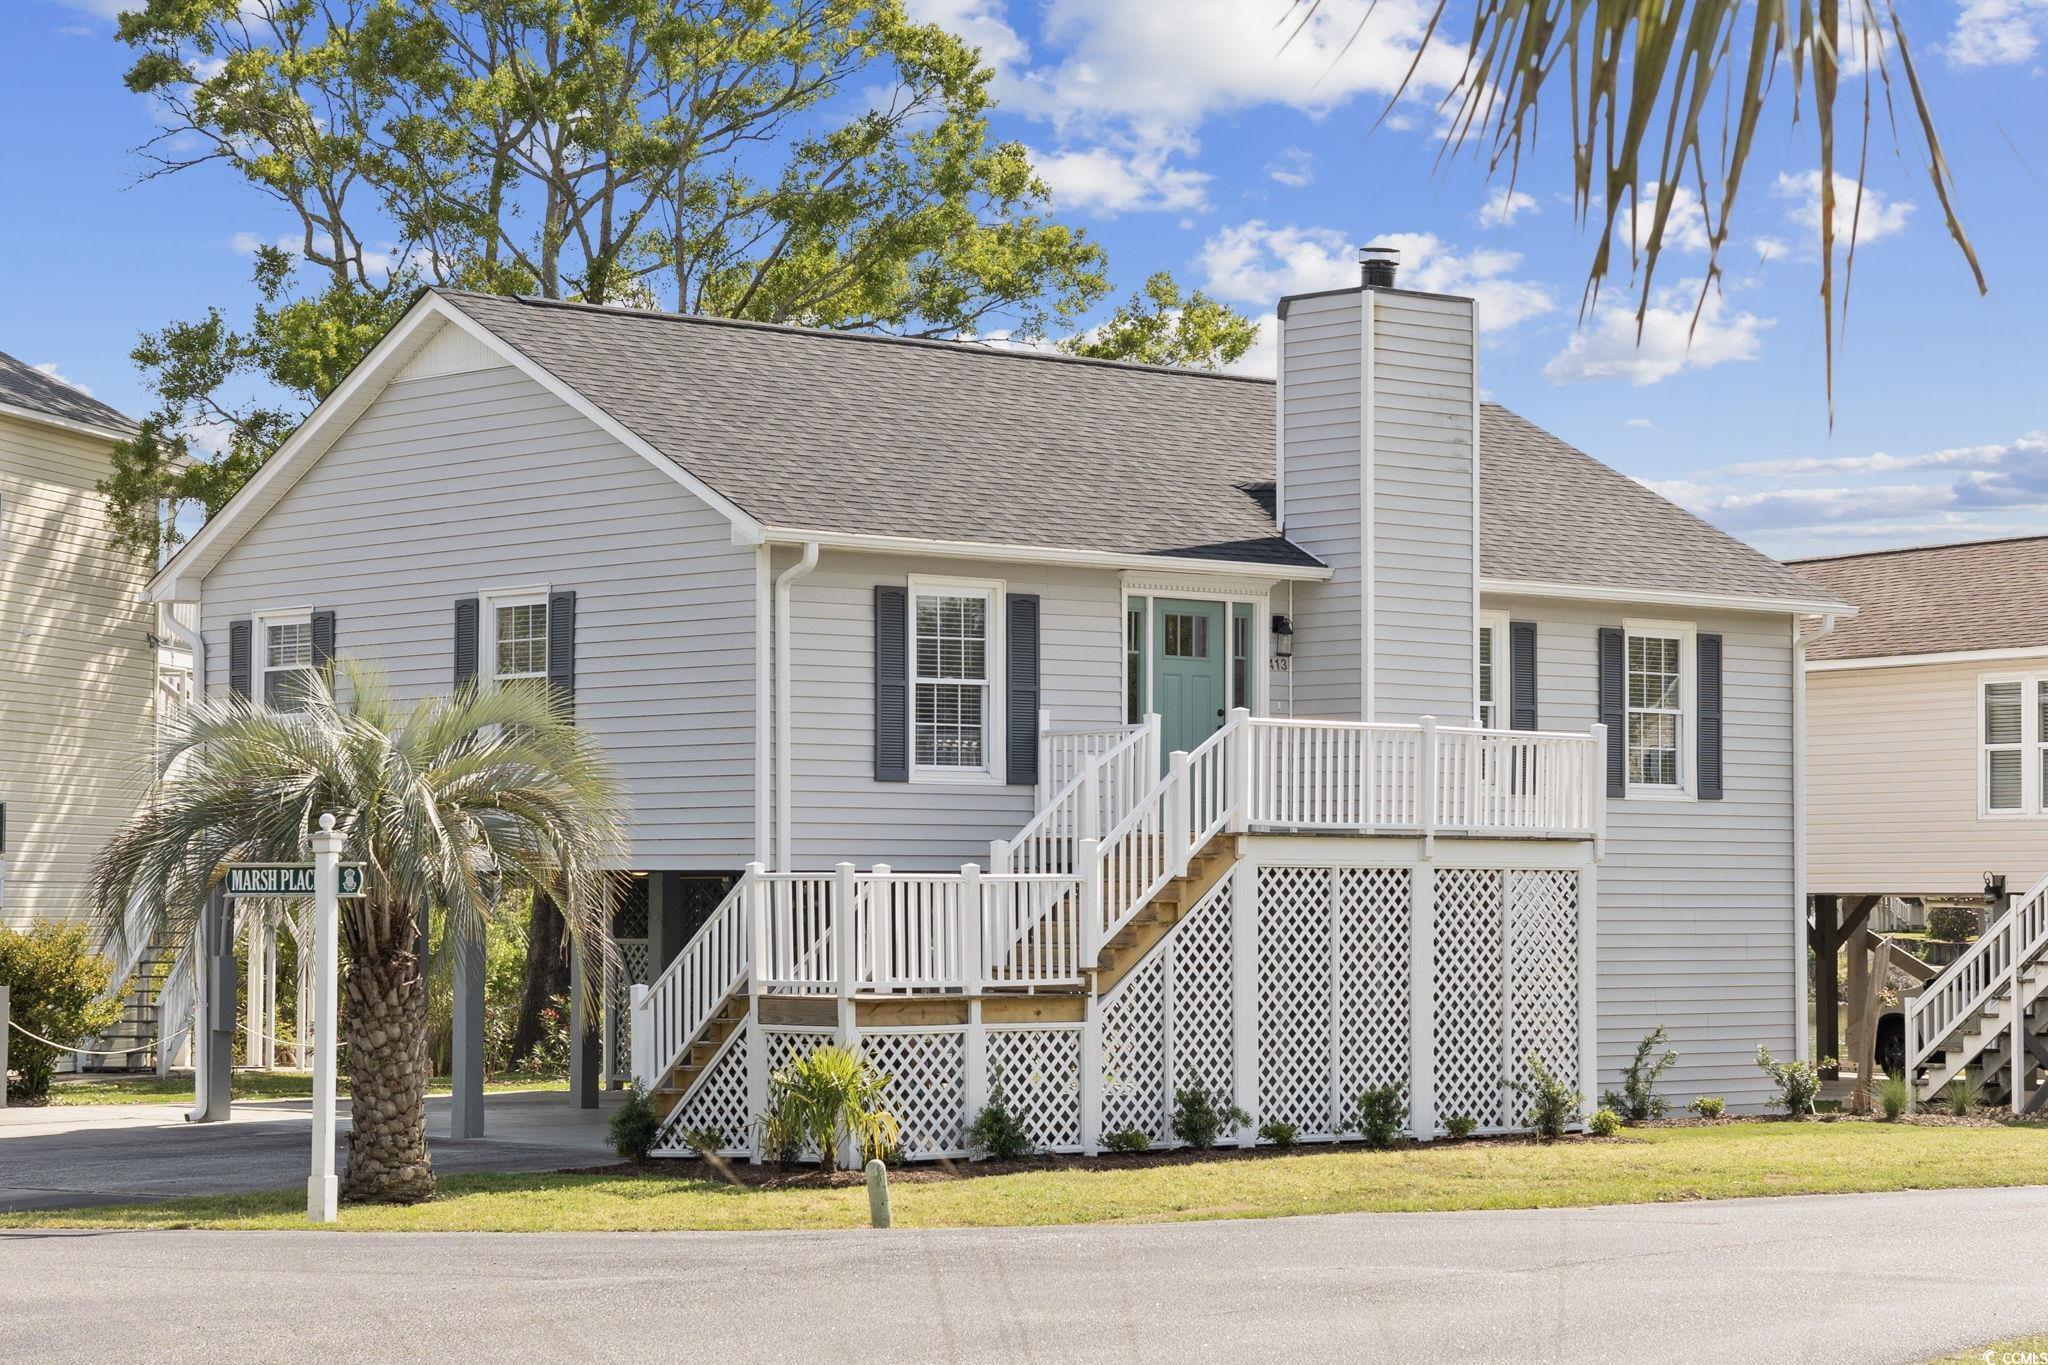 Photo one of 413 Bay Dr. Murrells Inlet SC 29576 | MLS 2409980